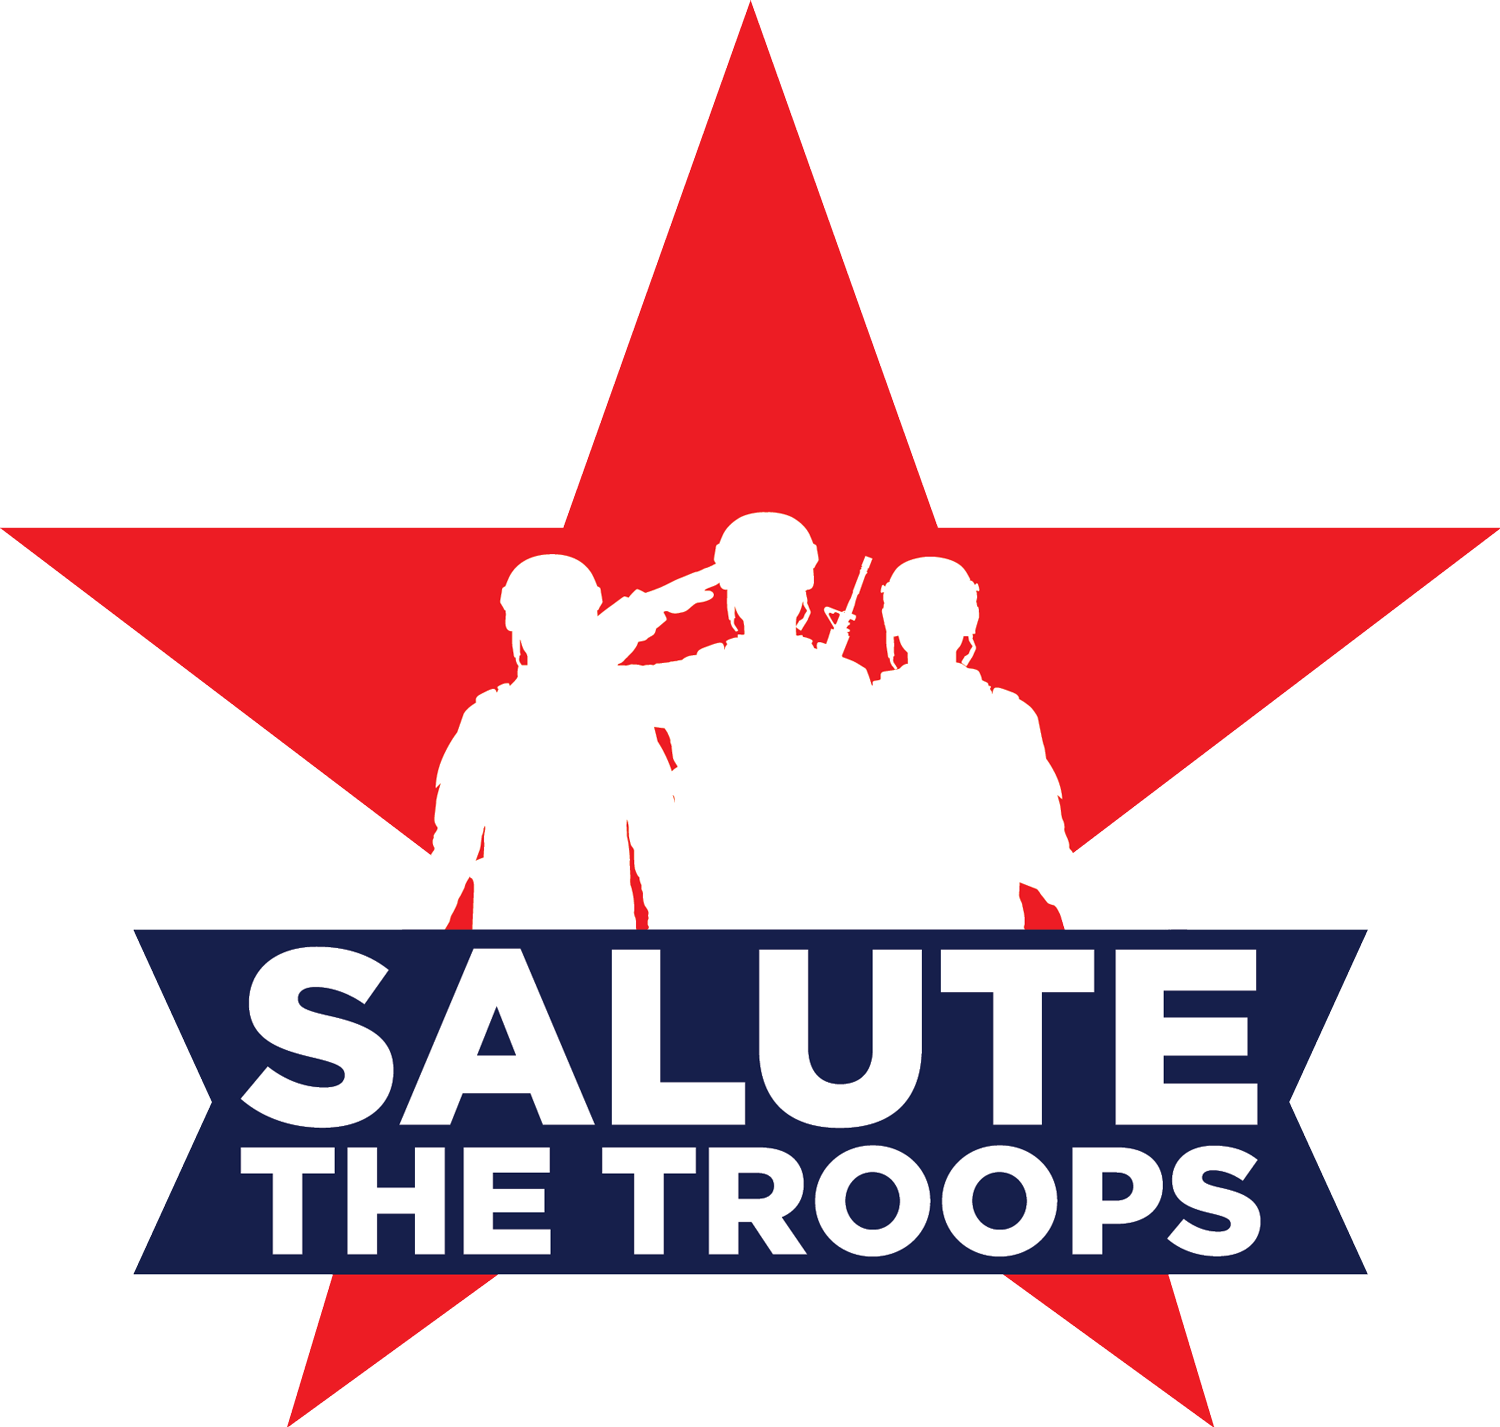 Salute the Troops badge